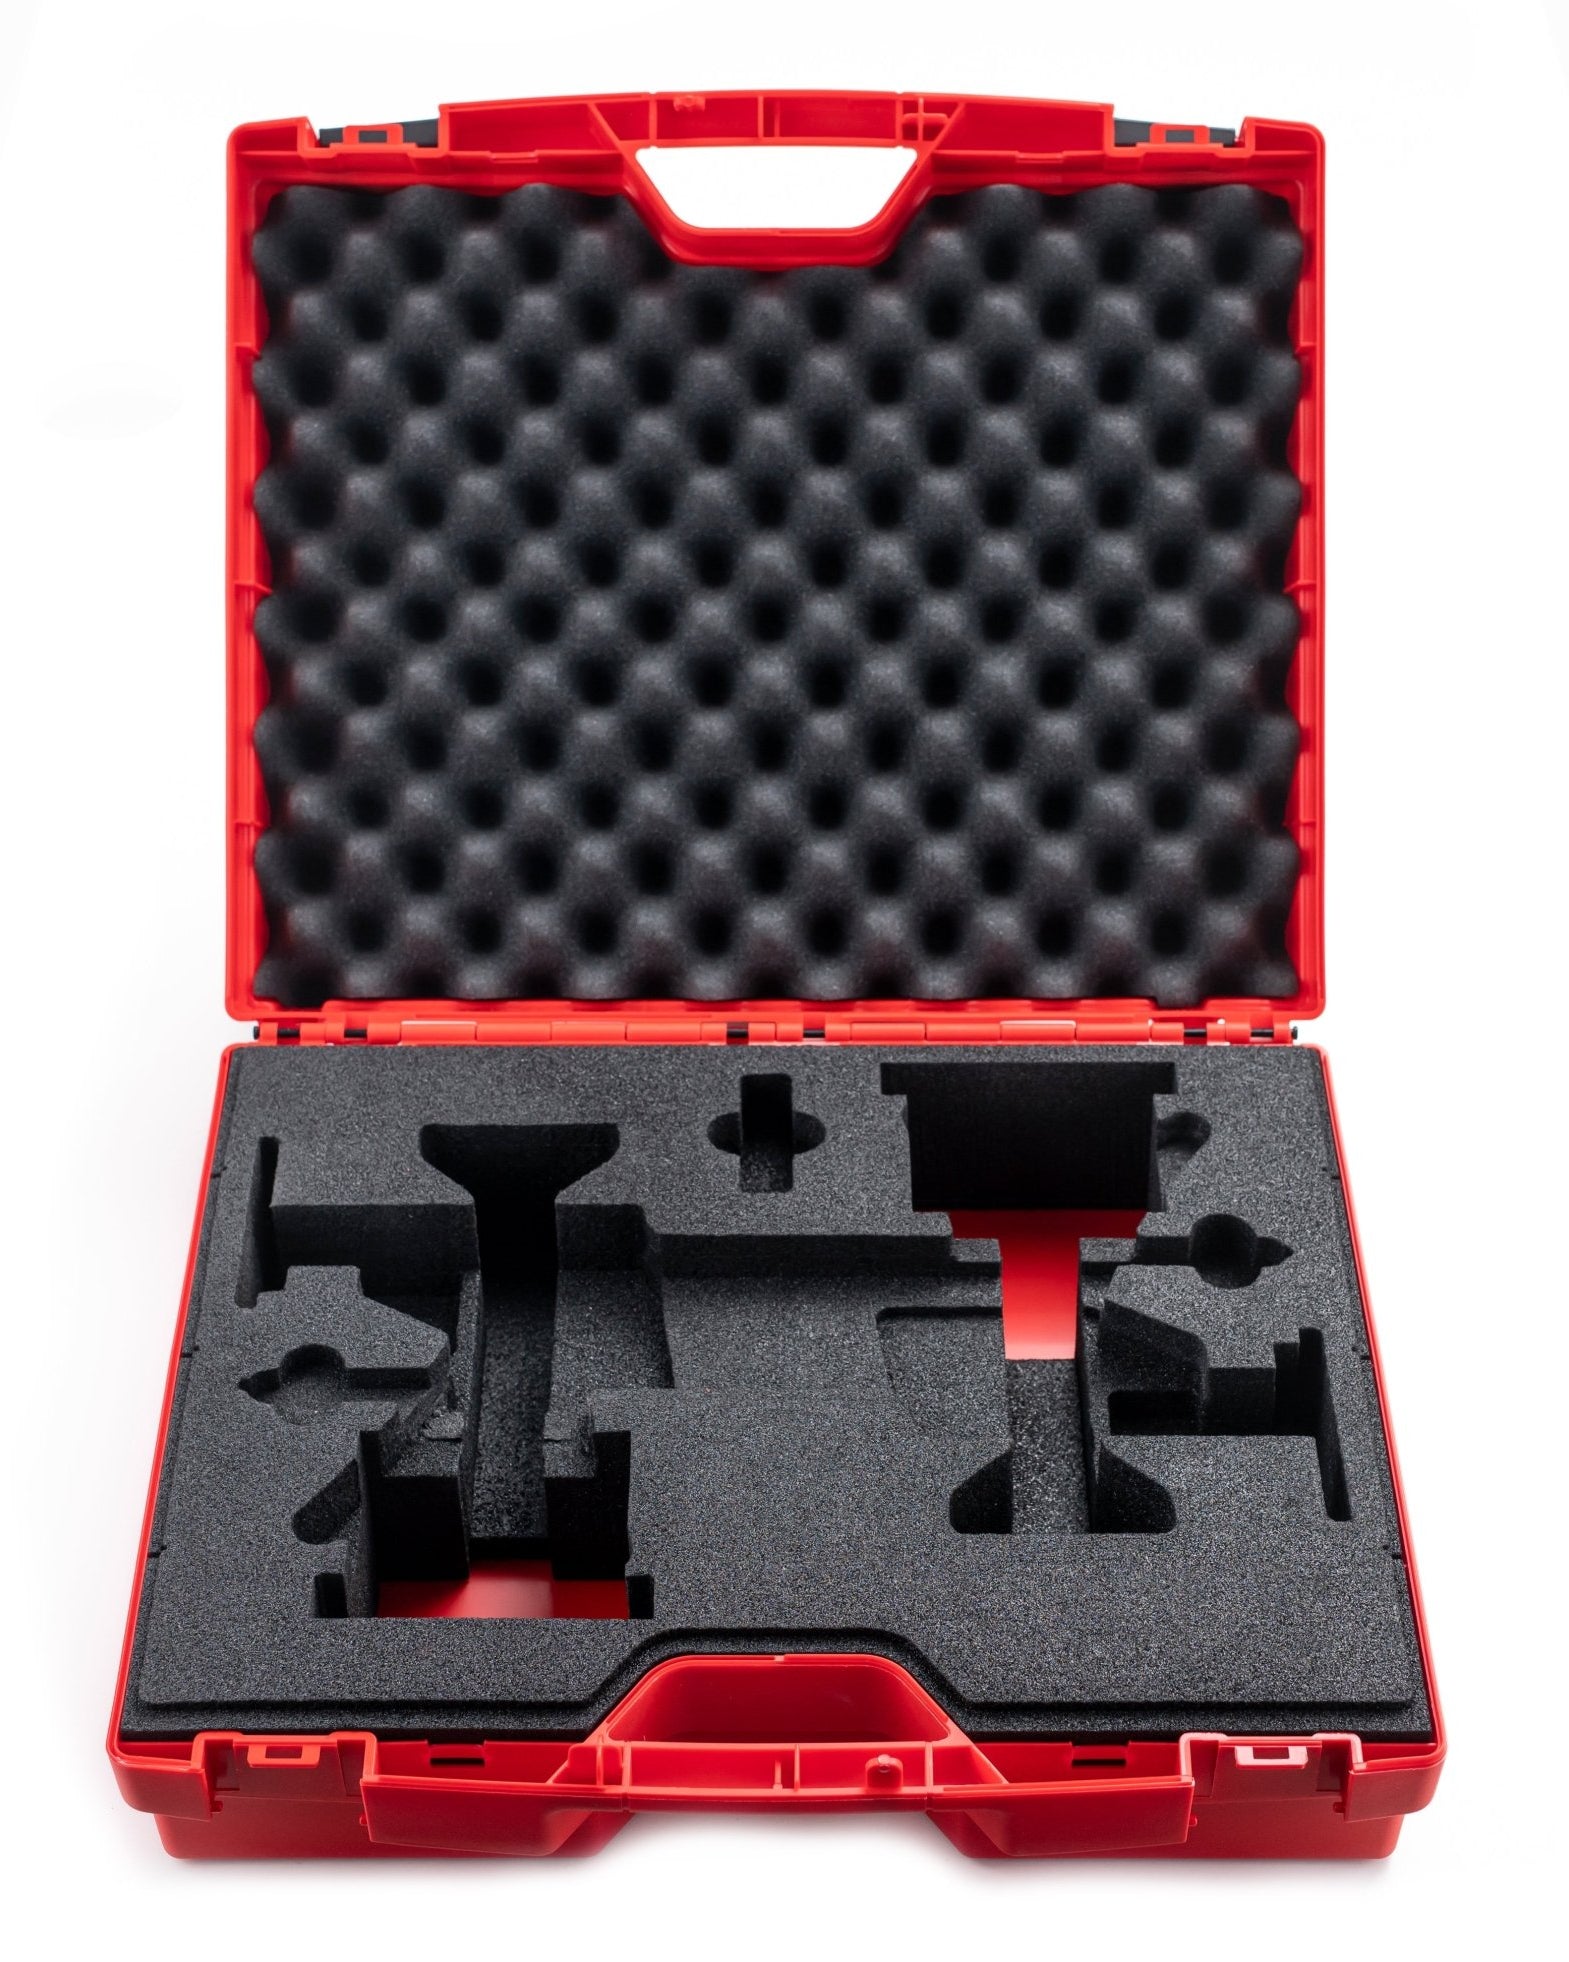 Massca Products | Storage Case for Viking Arm® & Cabinet Installation System. ( Option B ) | Woodworking | Massca Products